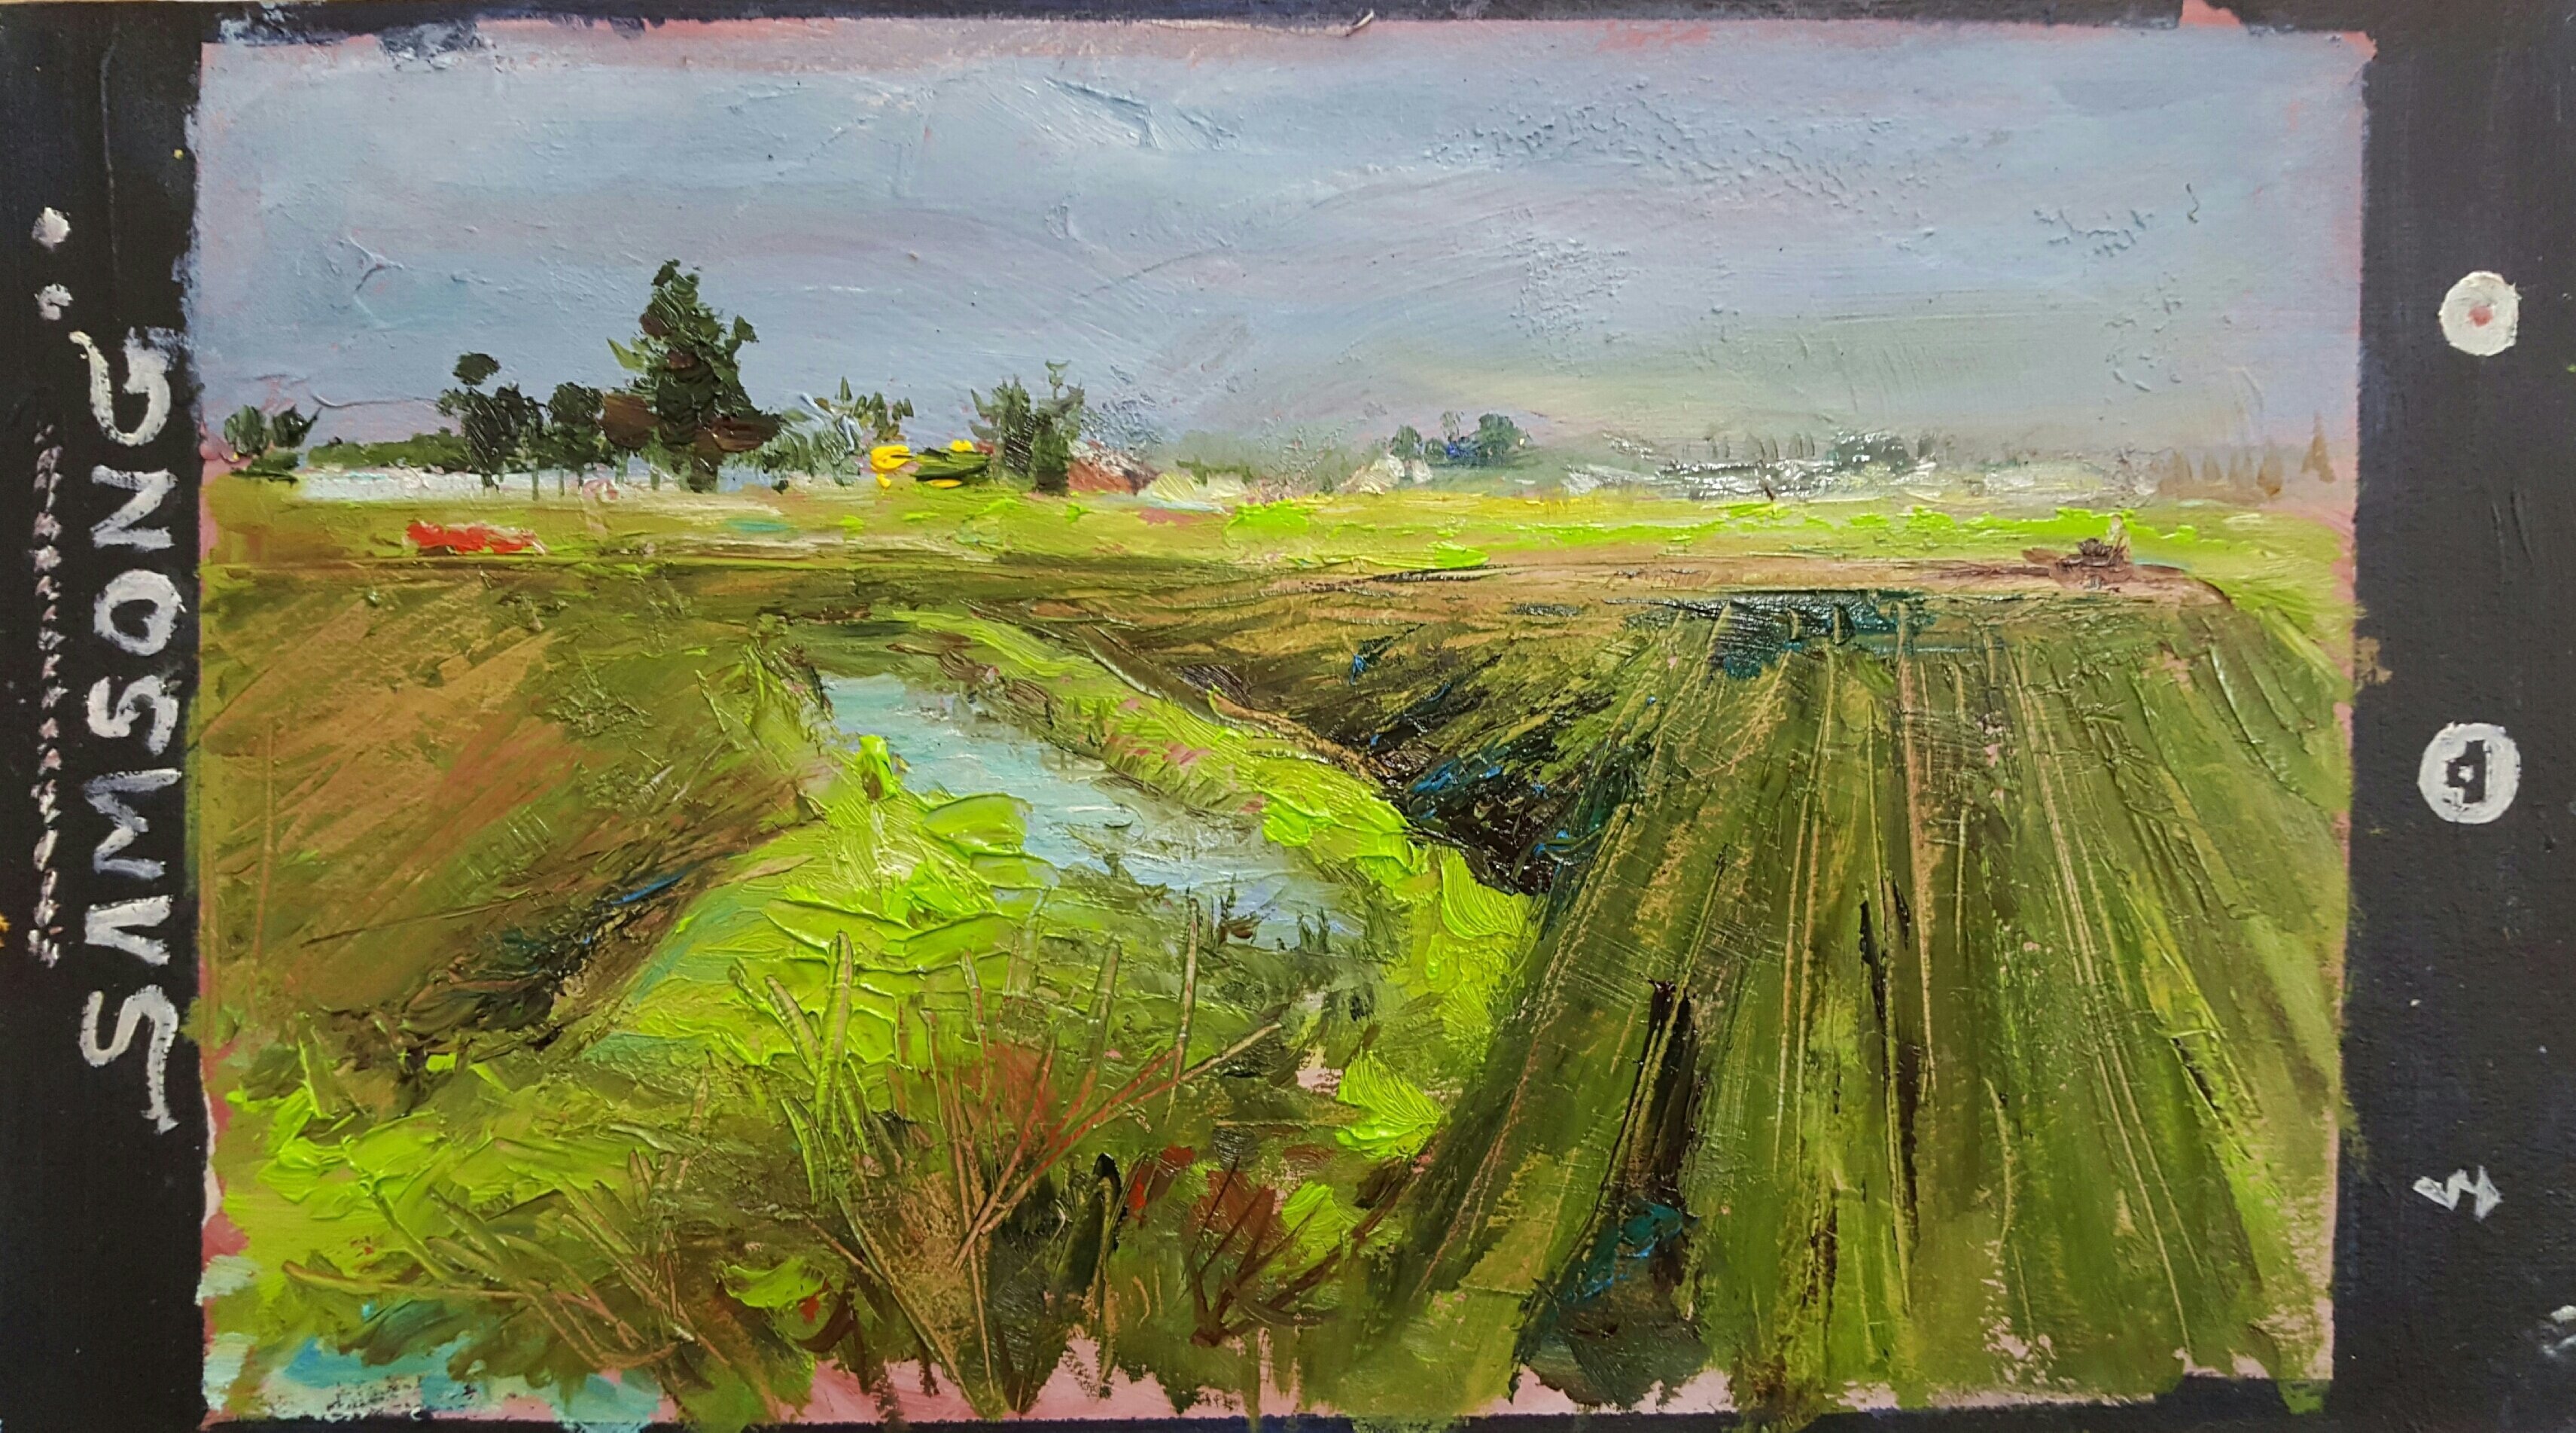 Yuming Zhu: 'All Lines and Forms', 2016 Oil Painting, Landscape. Original Plein Air oil on canvas.  I saw the world with lines and forms interwoven into each other.  Skagit valley where tulips will bloom.In this world, we snap shot the scene, I call for people to take a moment to look, feel the environment.Floating framed 16 x 20, ...